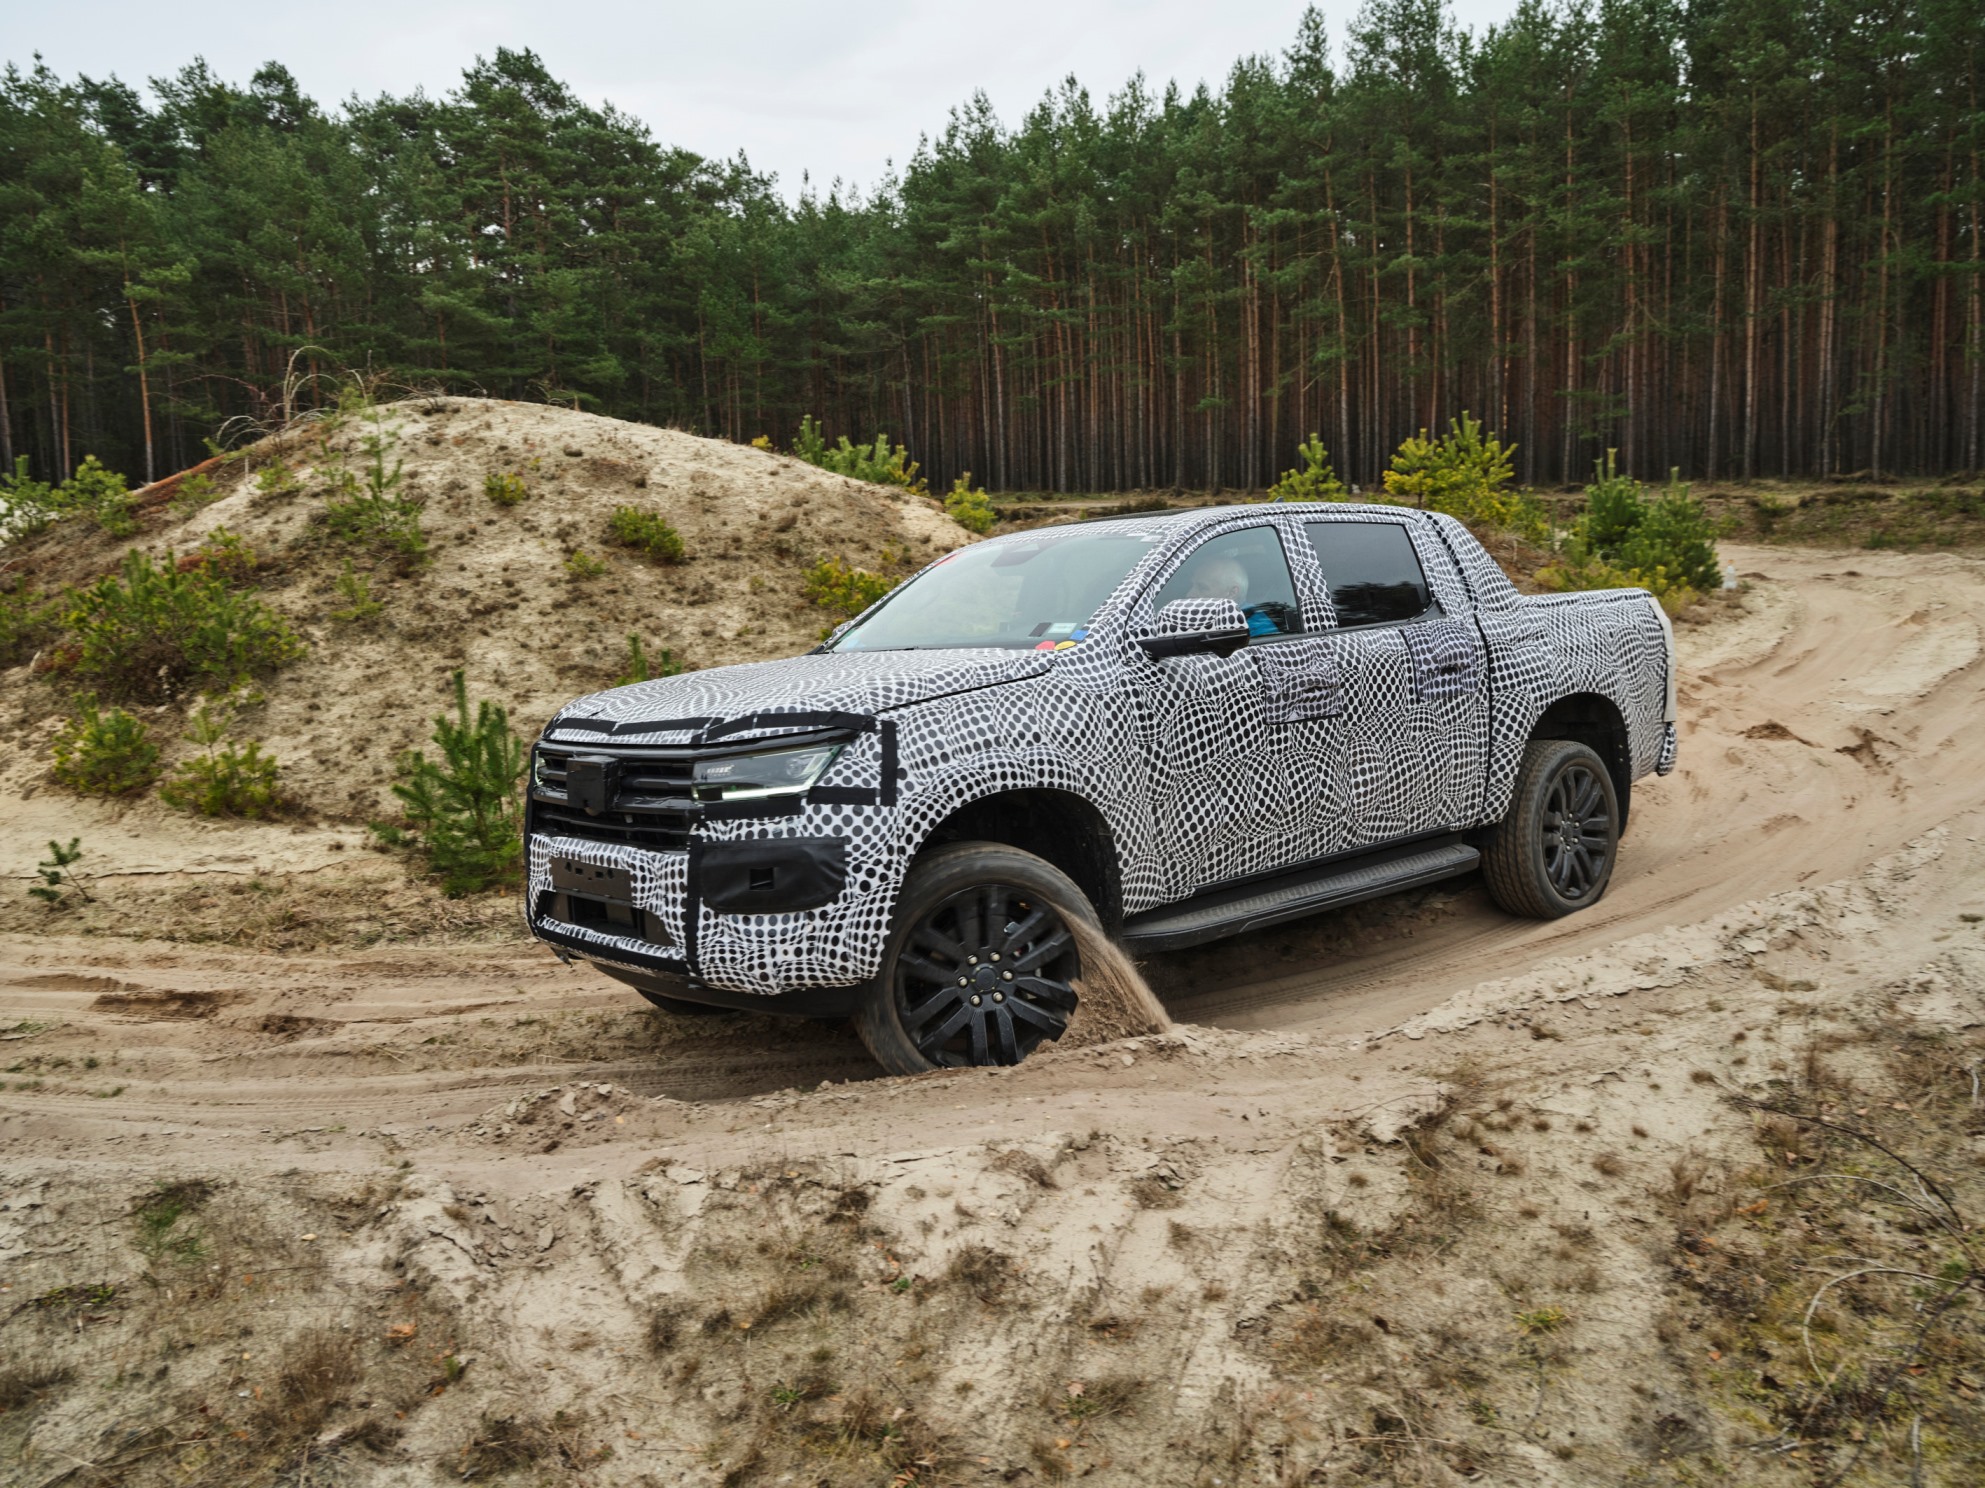 2023 volkswagen amarok cant hide ford ranger influences will get five engine choices 187341 1